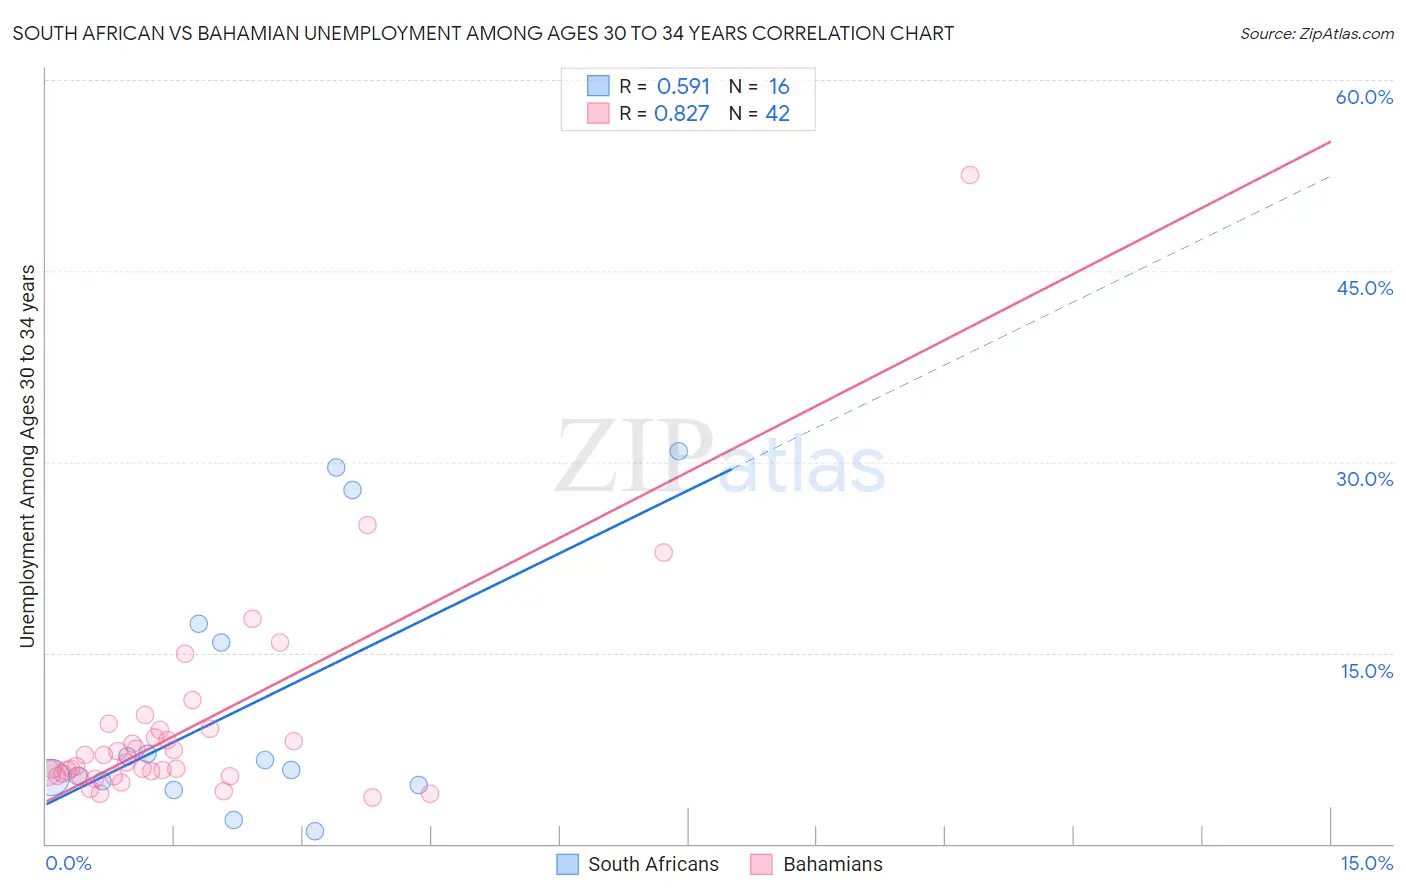 South African vs Bahamian Unemployment Among Ages 30 to 34 years